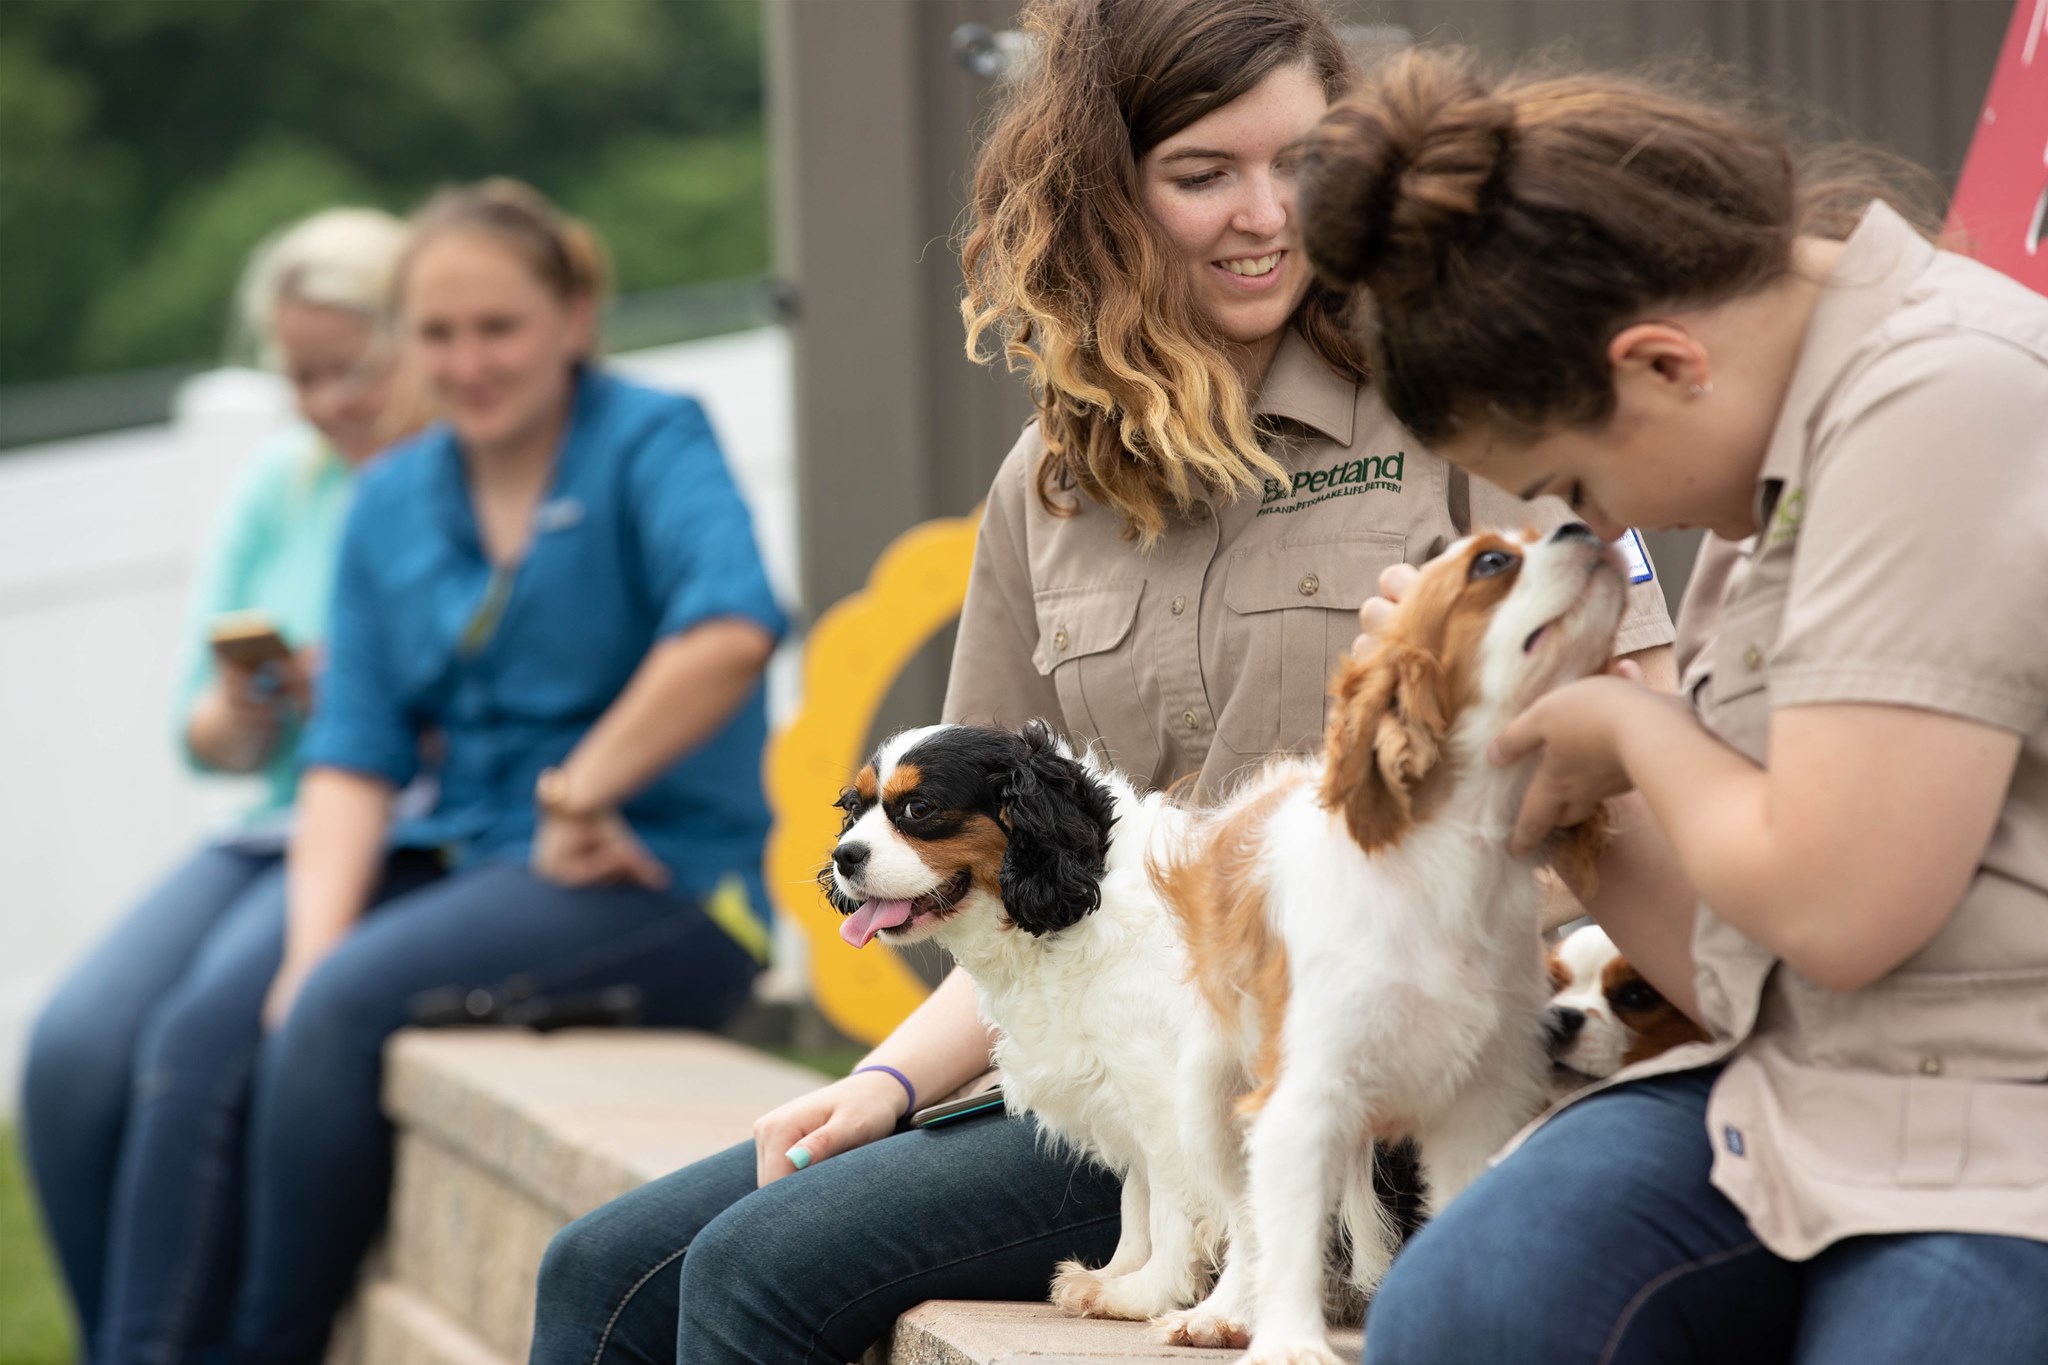 Chillicothe Based Petland Announces Expansion into Nier Spec Building; Addition of 21 New Jobs